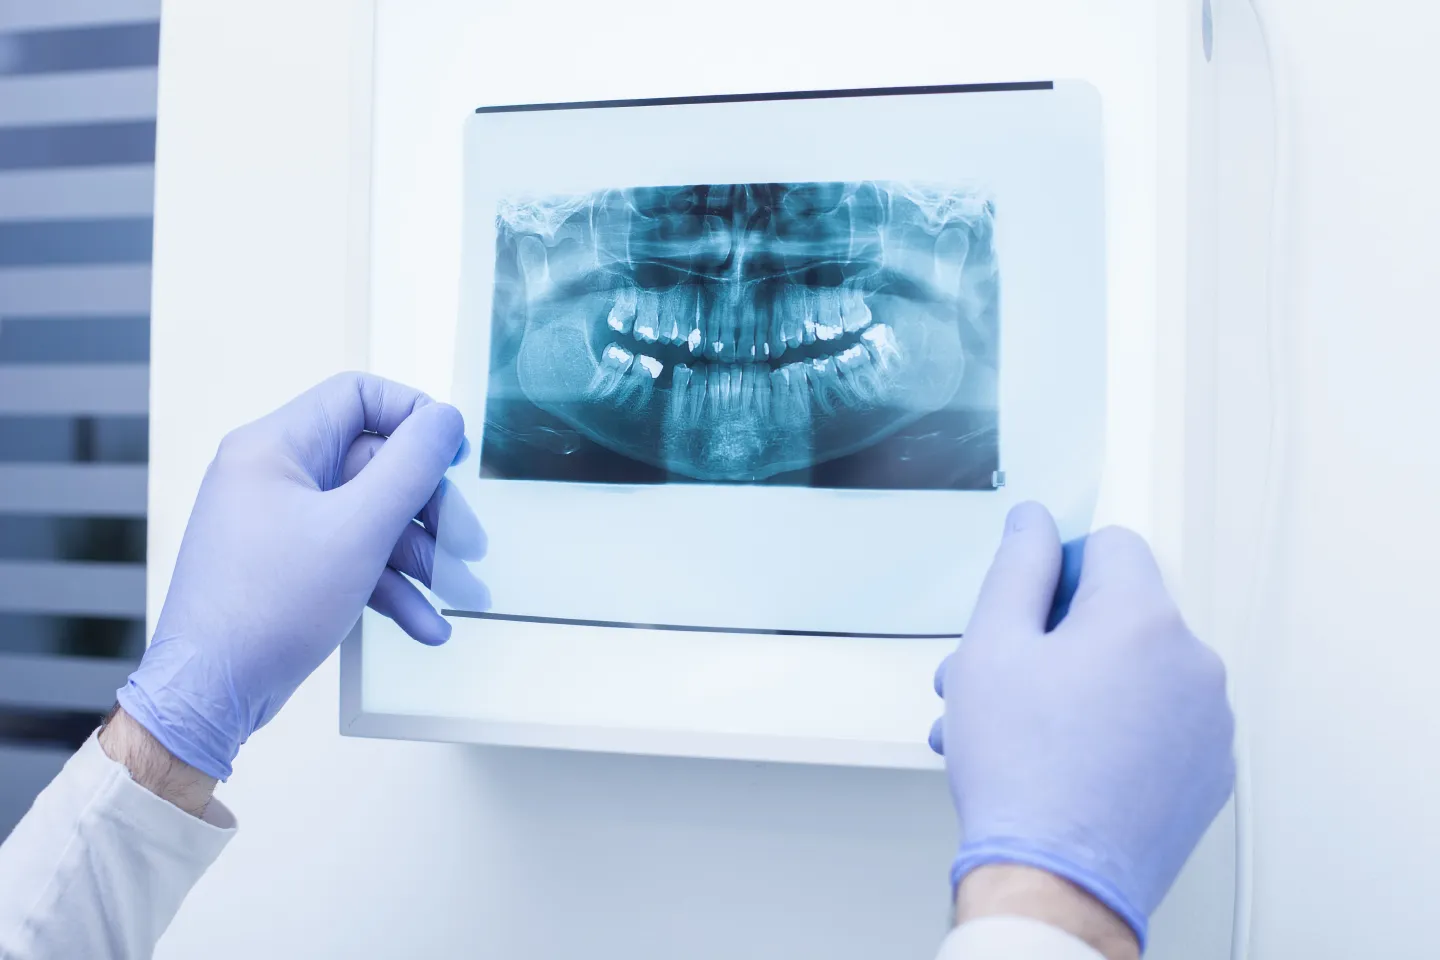 Dental X-Rays: Types, Uses, and Safety |  222 Main Street Dental of Milford
